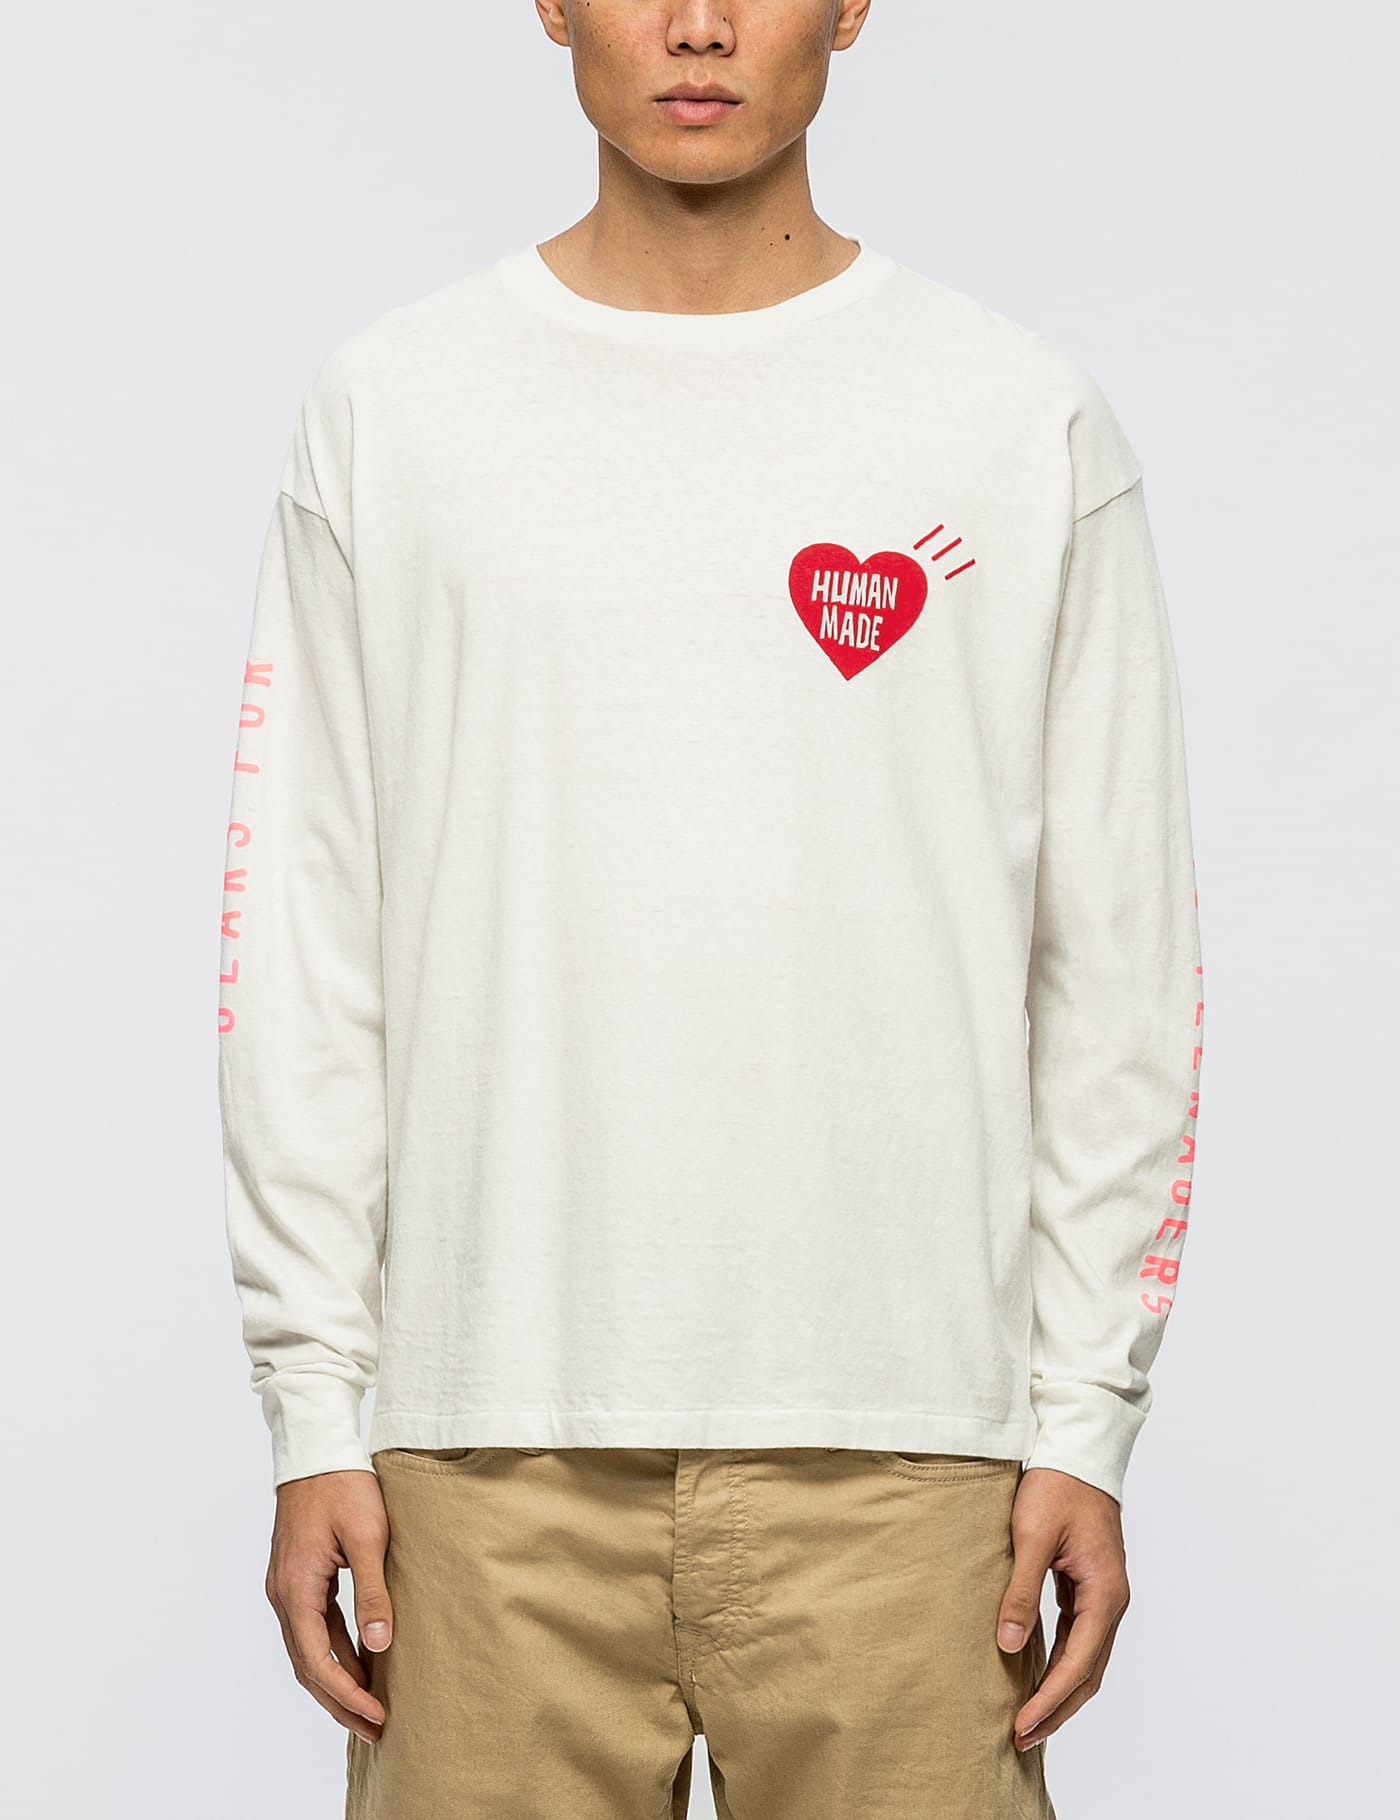 Human Made   Heart Logo L/S T Shirt   HBX   Globally Curated